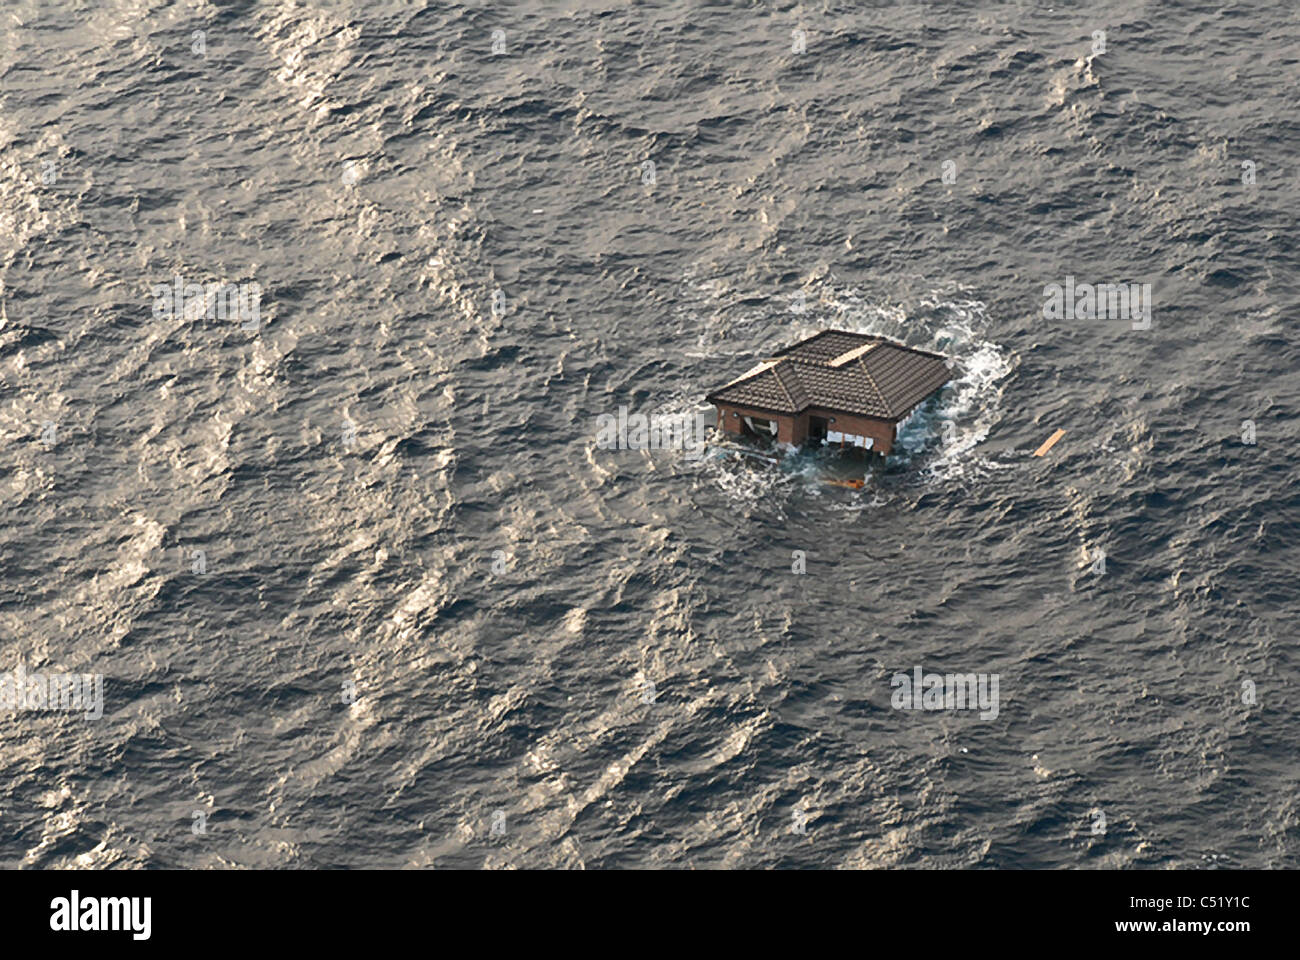 Aerial view of home adrift in the Pacific Ocean following a massive earthquake and tsunami in Japan. Stock Photo